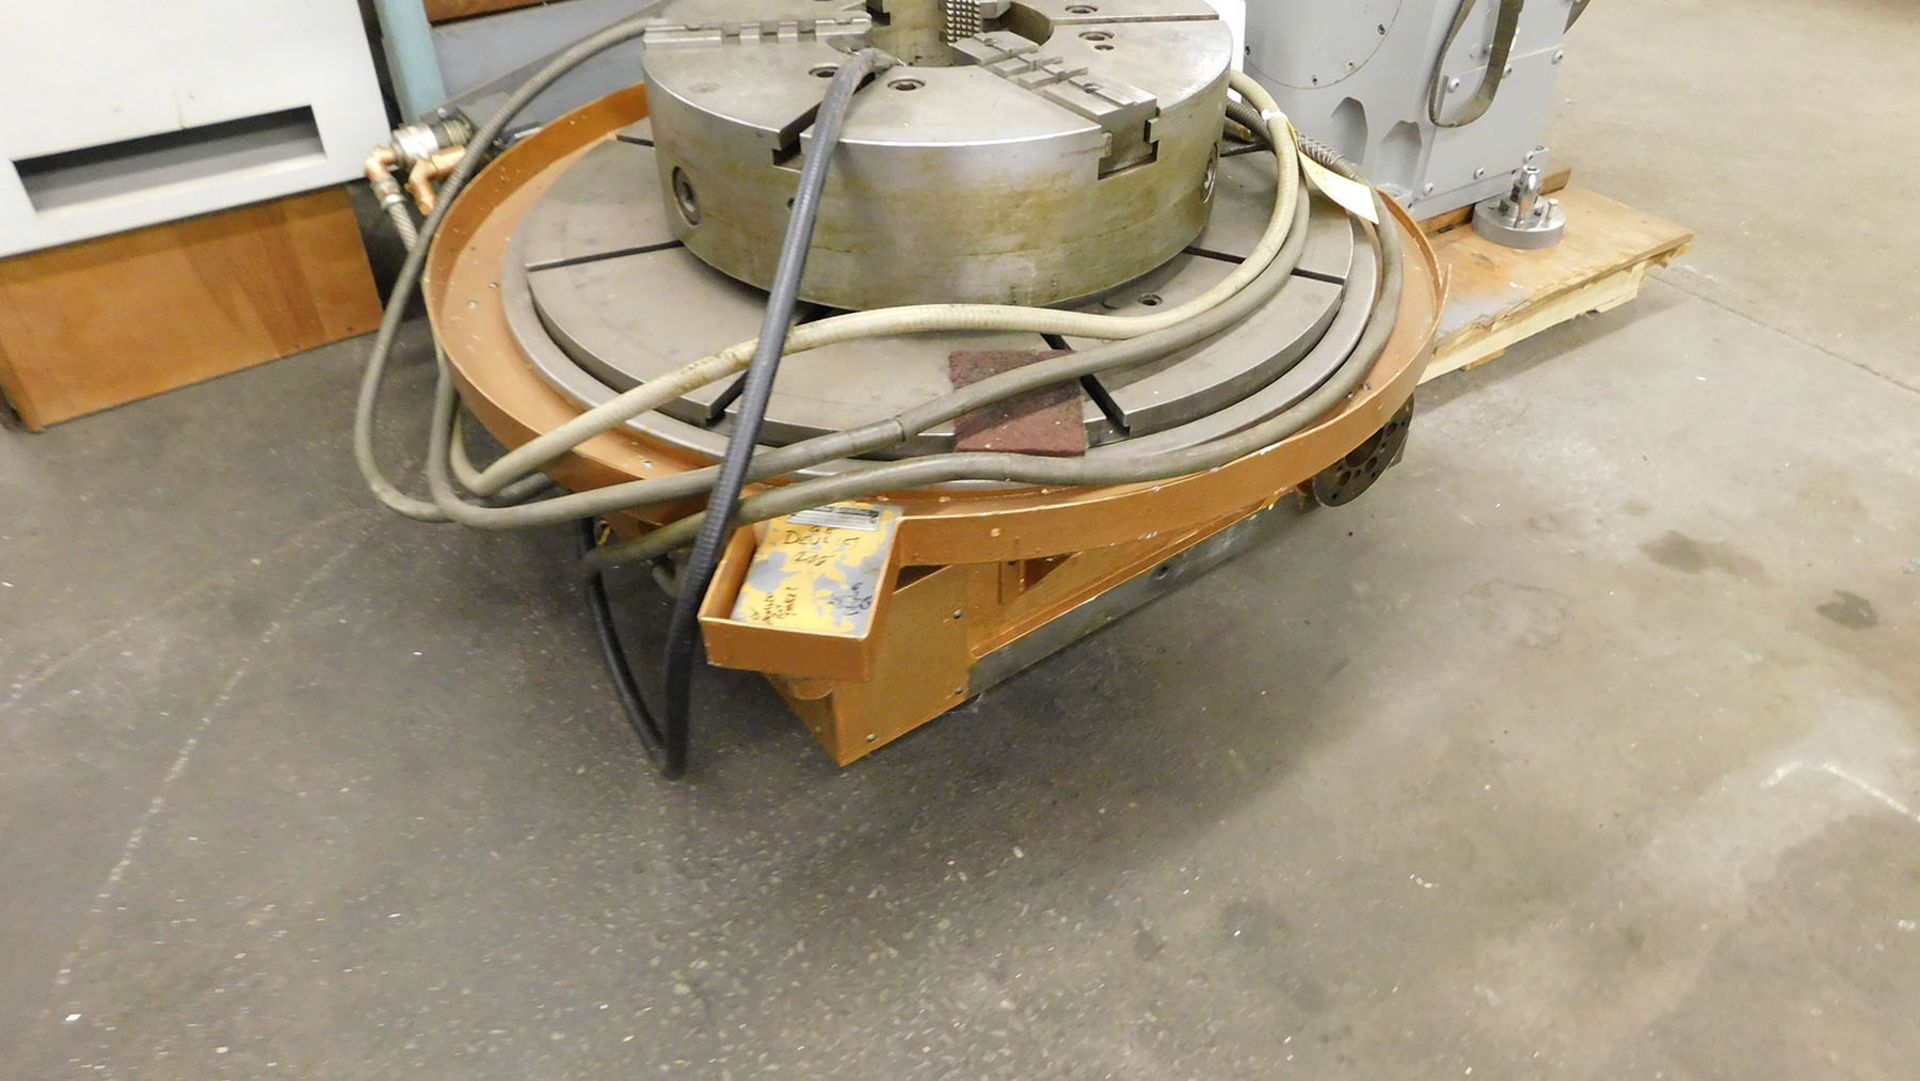 PRODUCTO MACHINE CO NC 34'' ROTARY TABLE; MODEL 0130, S/N J602-3 WITH A 24'' 3-JAW UNIVERSAL CHUCK - Image 4 of 4